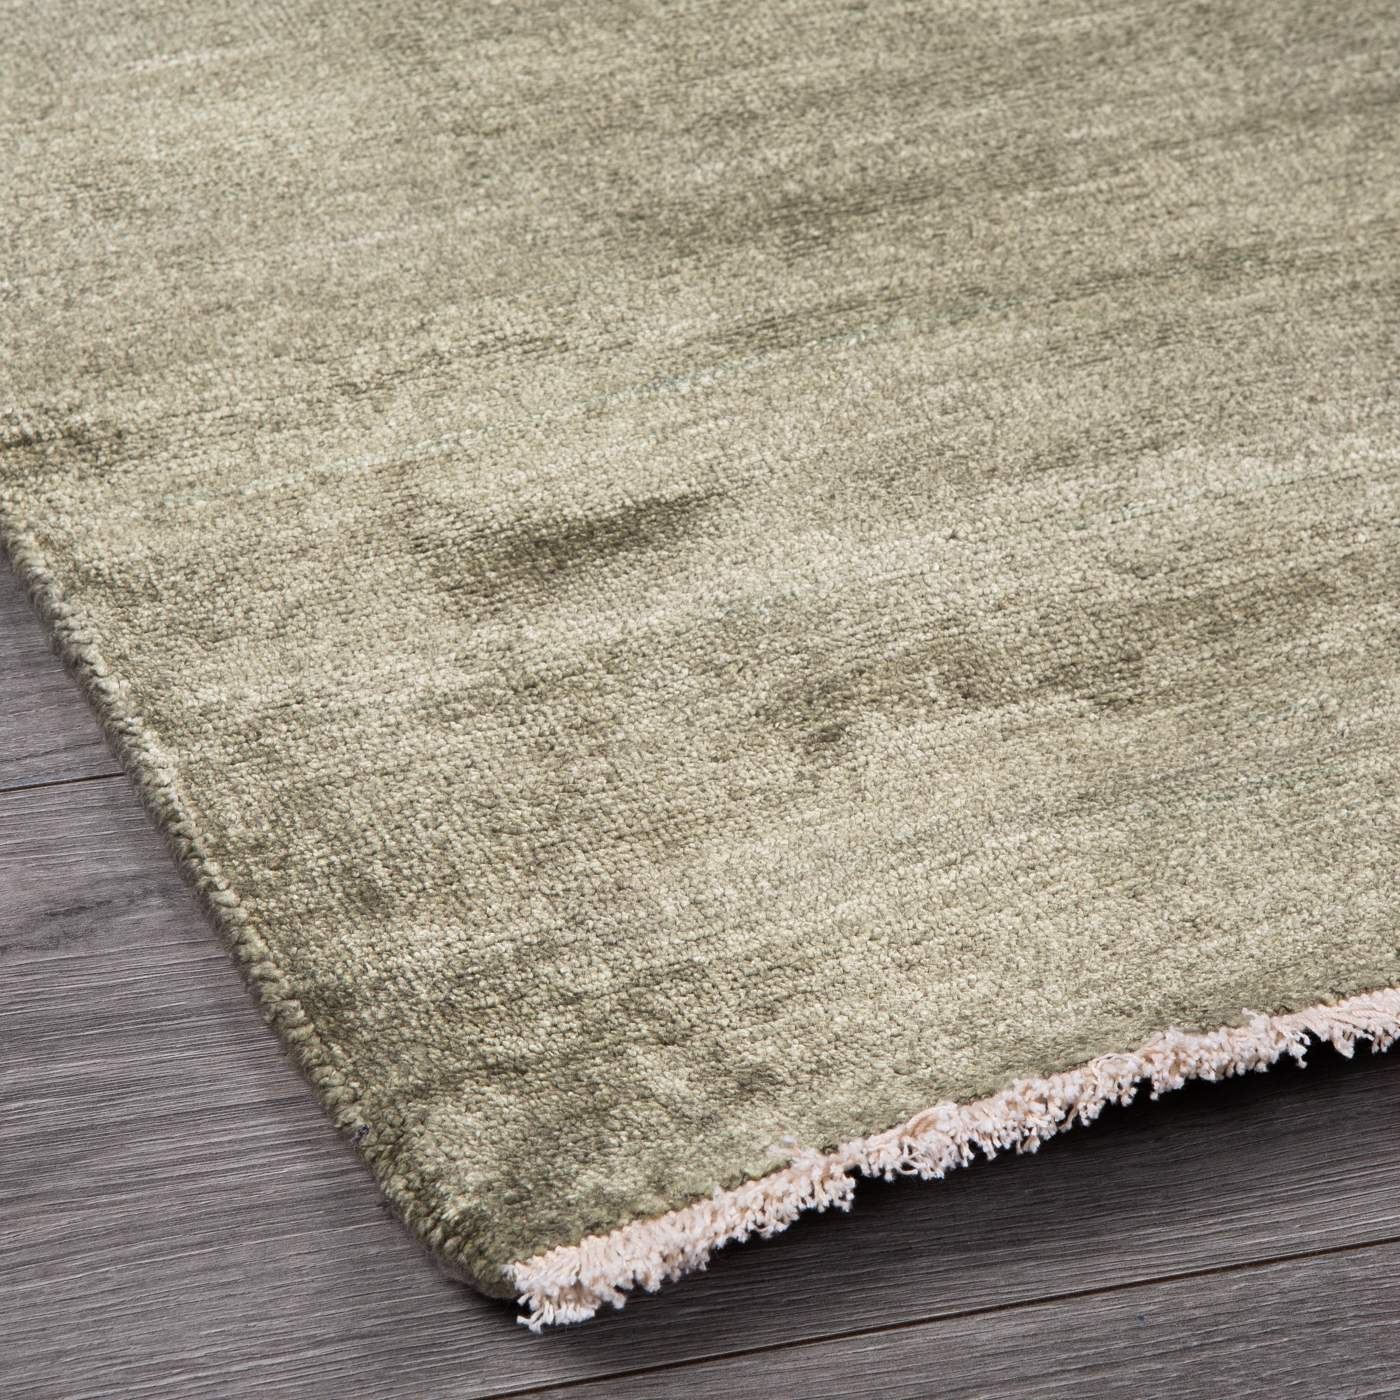 The Elte Heritage Rug Collection unites sumptuous natural materials with the highest regarded weaving and knotting techniques employed by master artisans that have built on generat